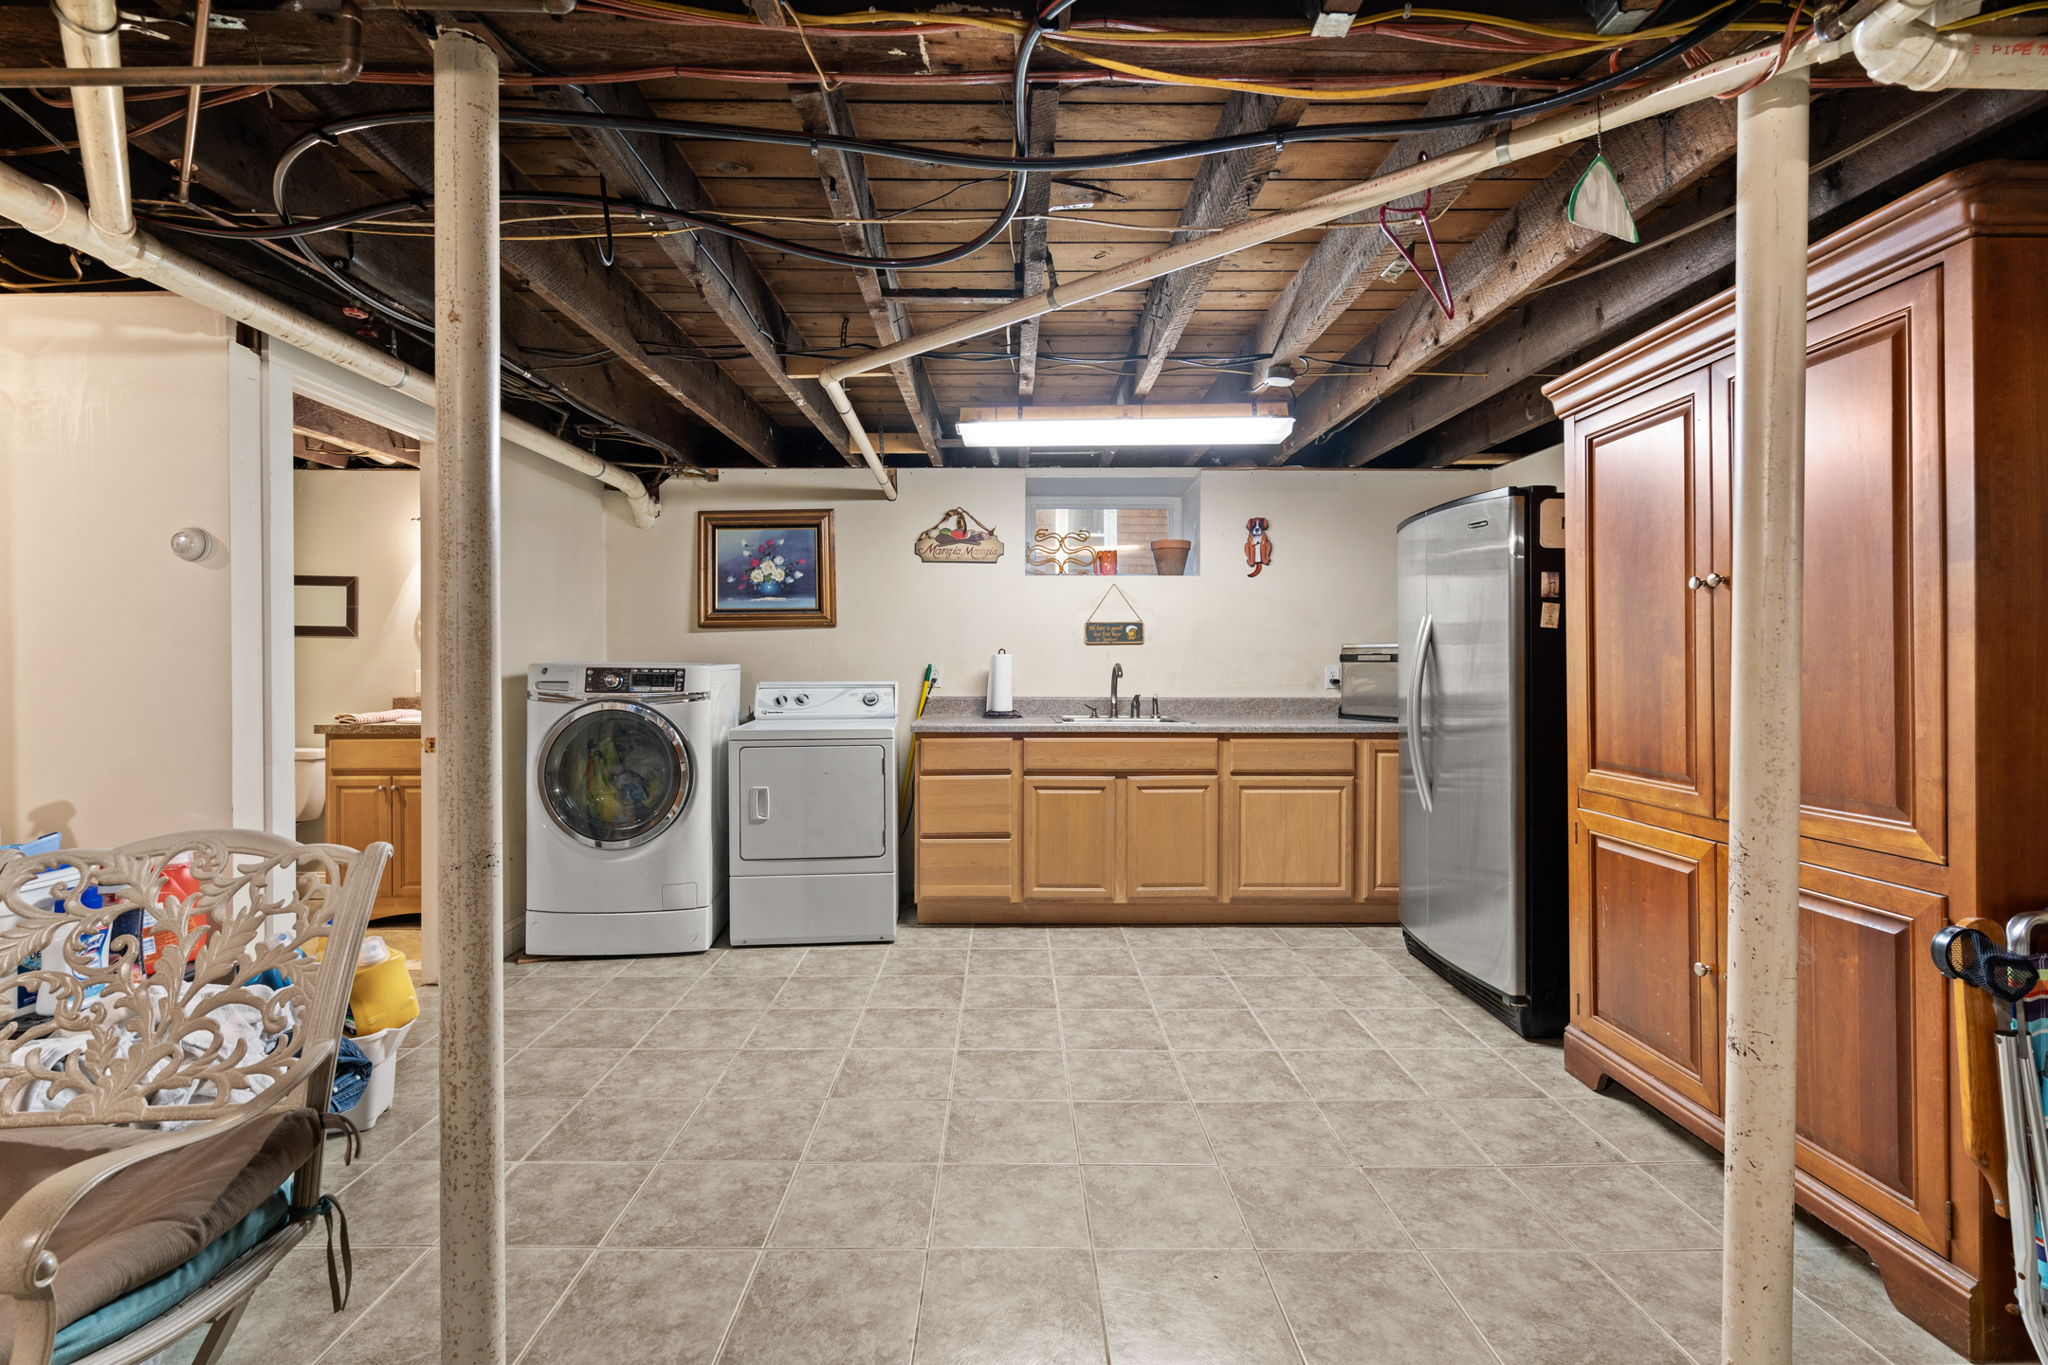 A view of the basement with tile floor, cabinetry, columns, exposed joists, and a laundry setup.